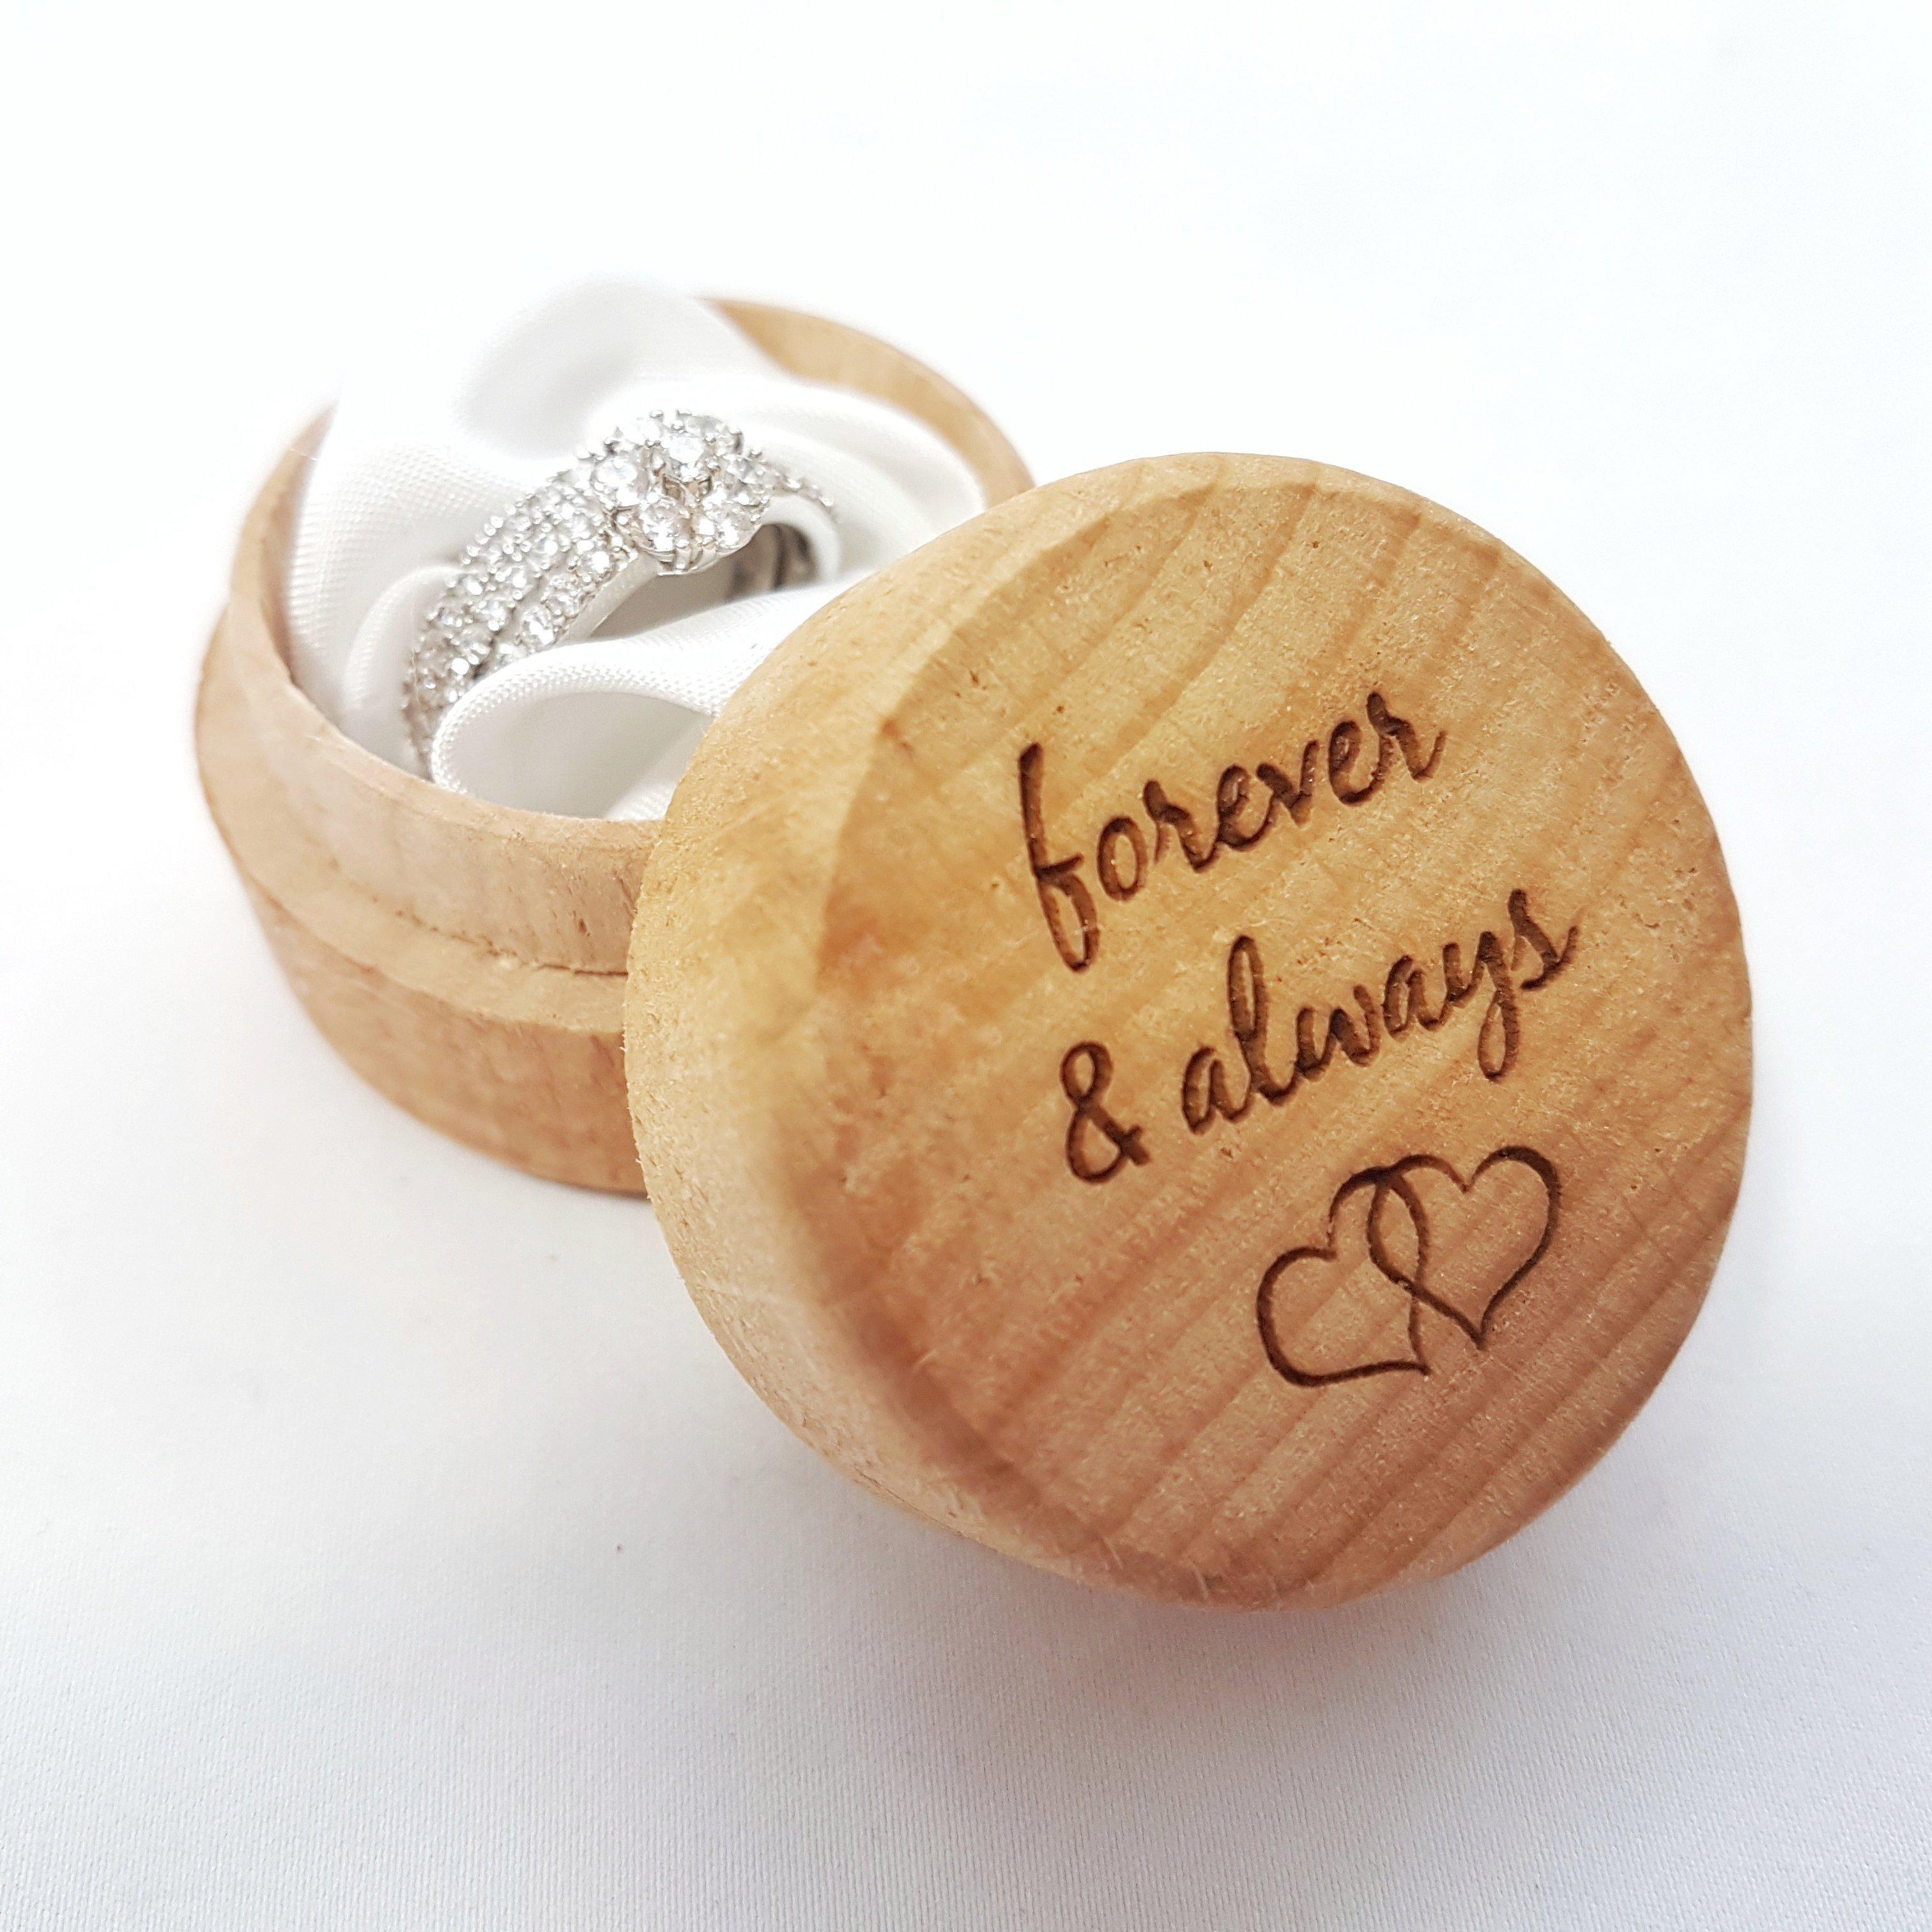 Forever Always Ring Box I 5th Anniversary Gift for Her